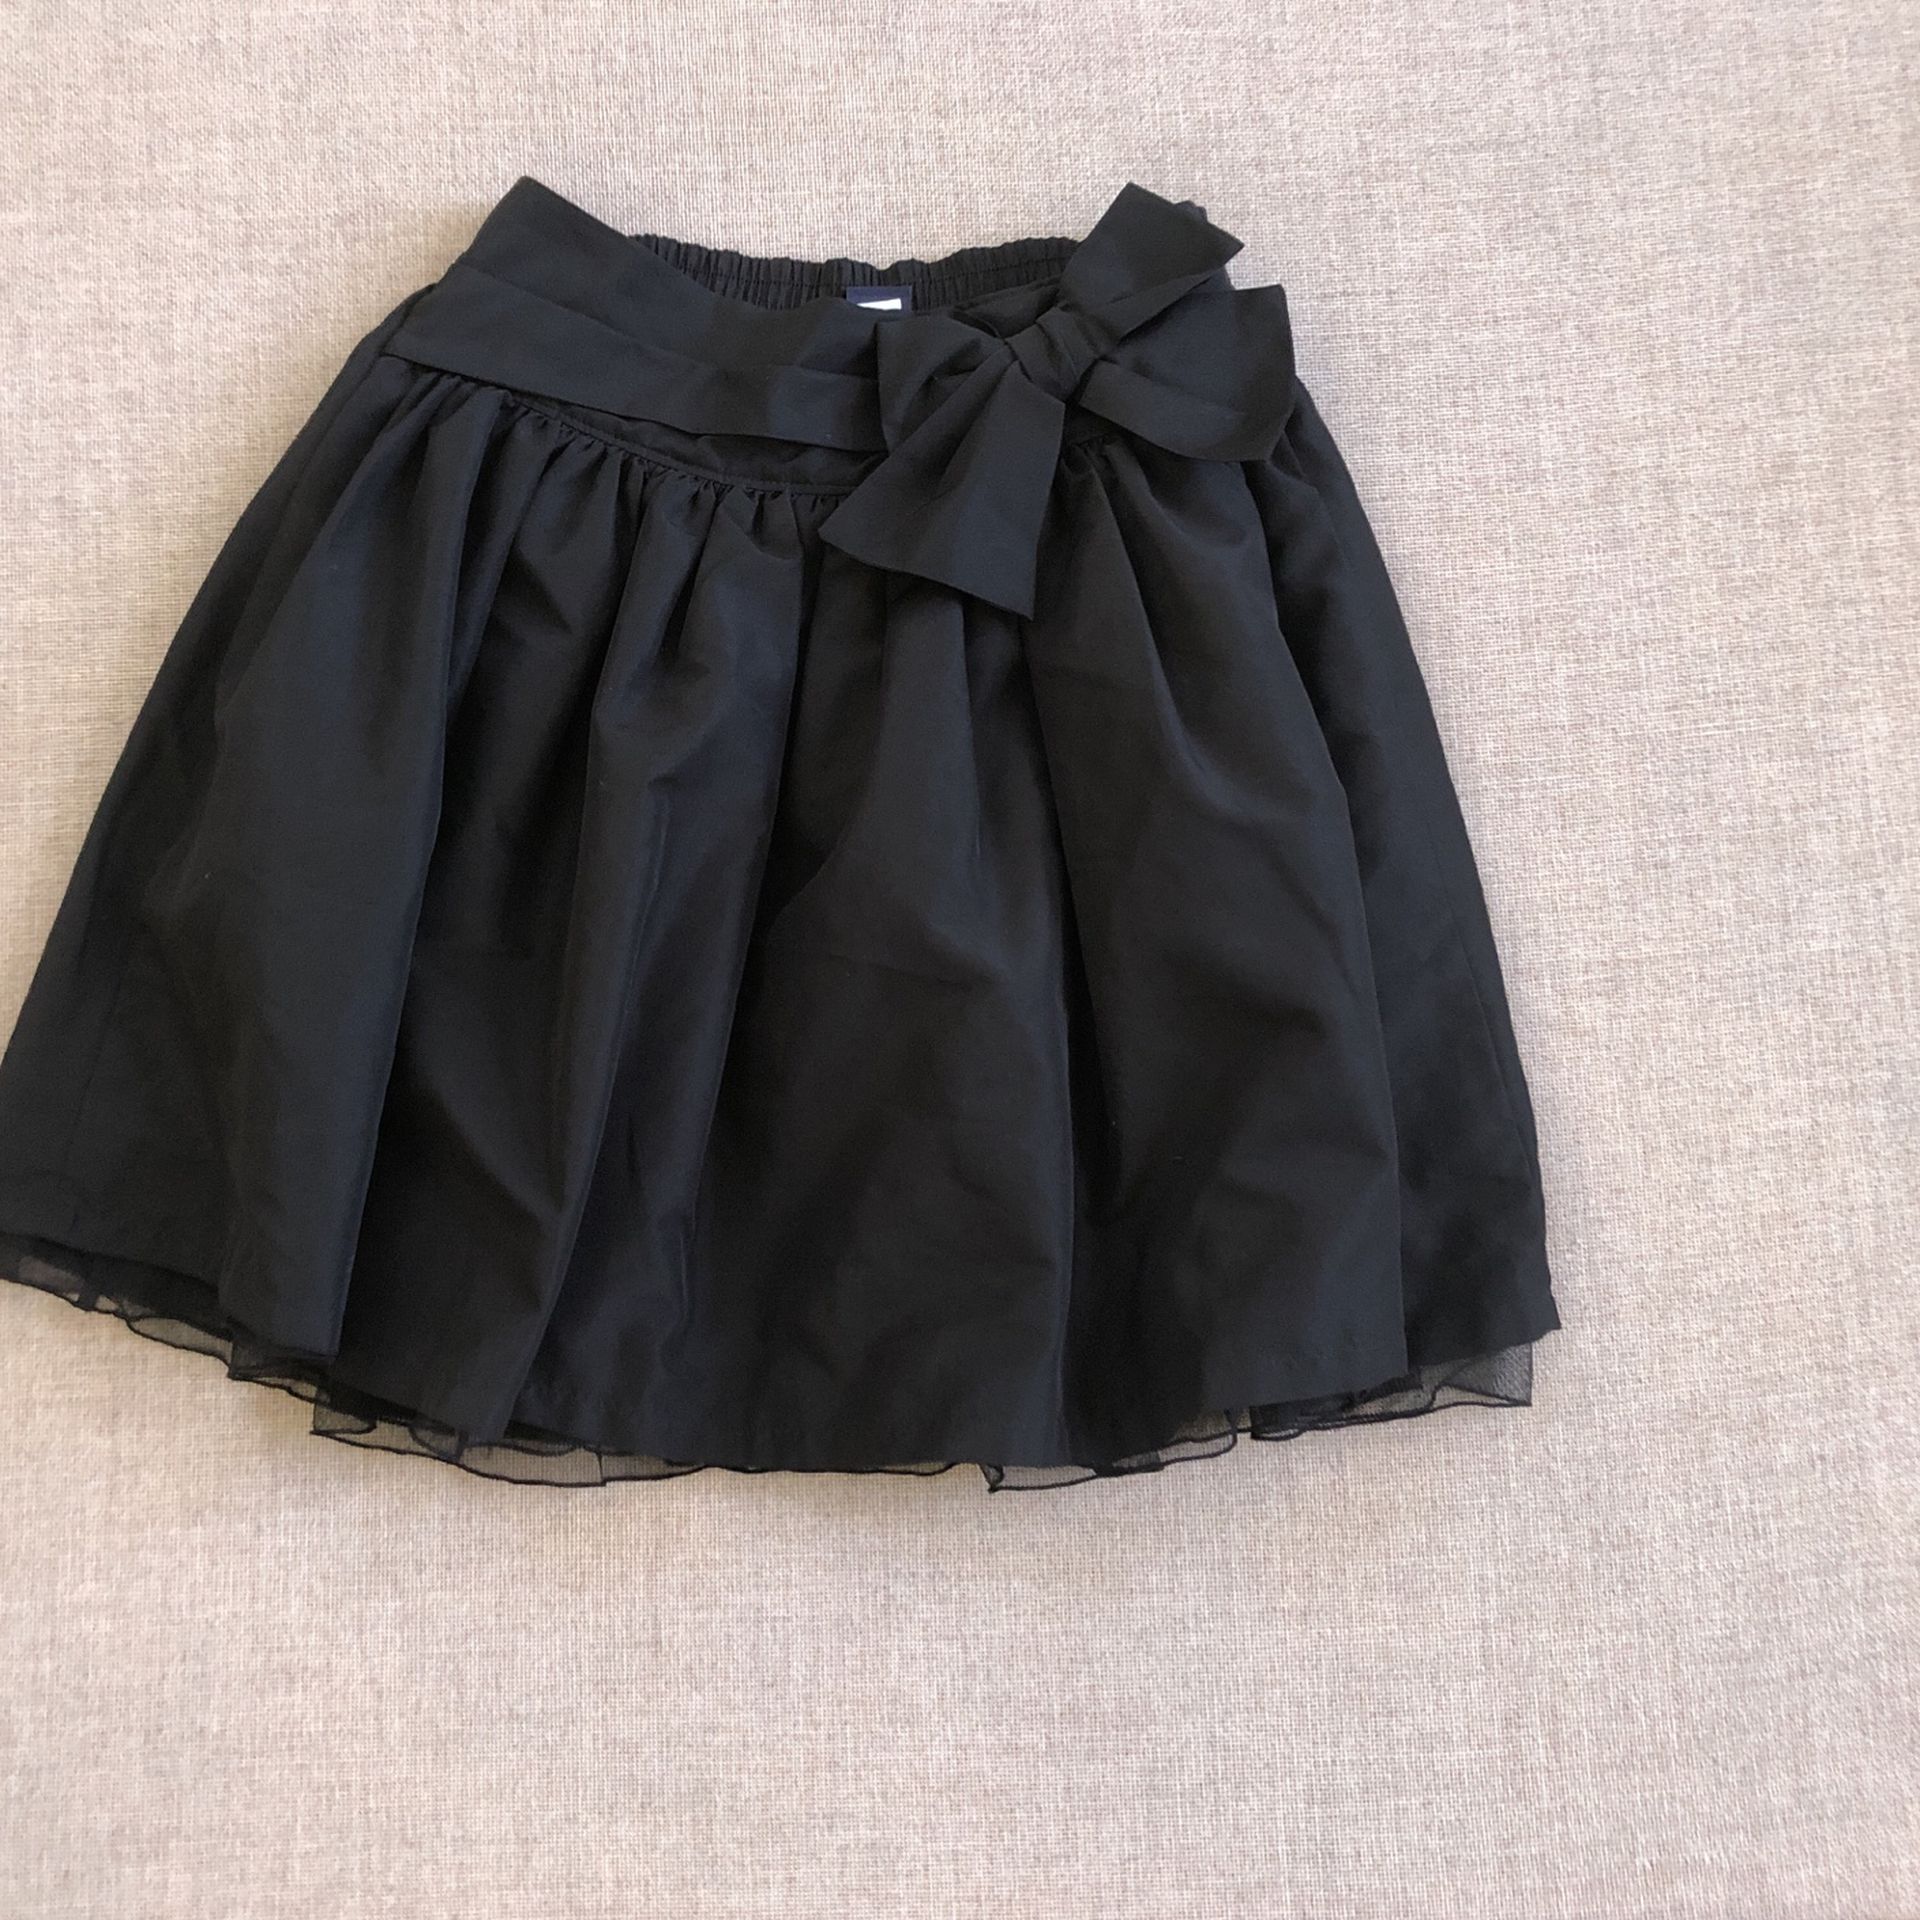 Skirt with Tulle And Lining Layers, Size 8 Gap